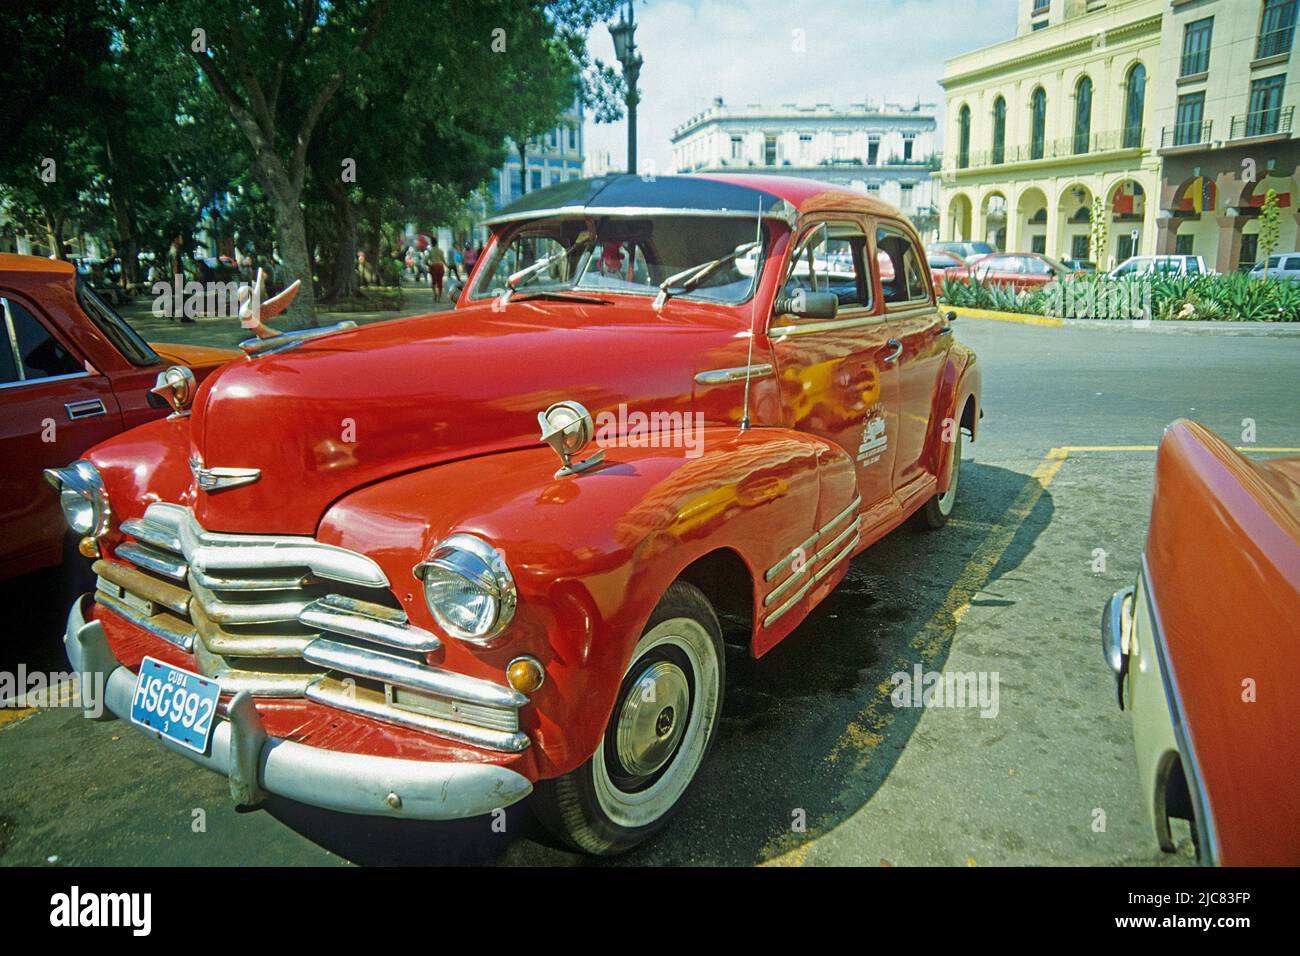 Chevrolet, classic car in the old town of Havana, Cuba, Caribbean Stock Photo